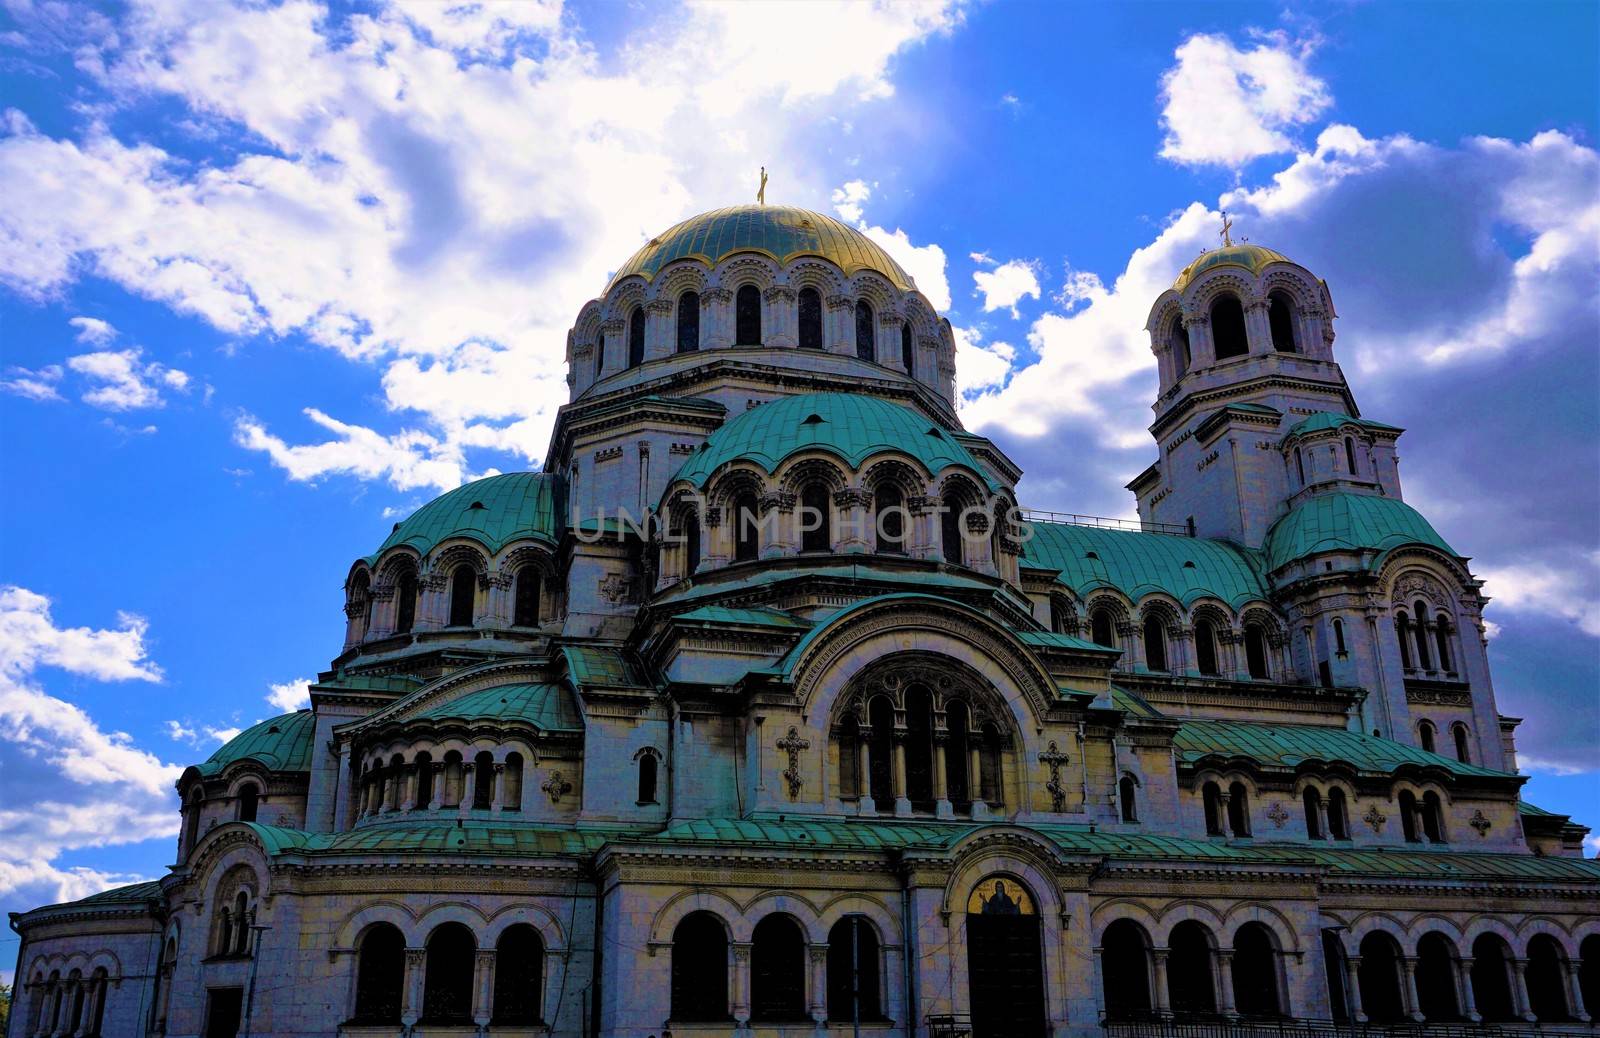 The Alexander Nevsky cathedral in Sofia by pisces2386